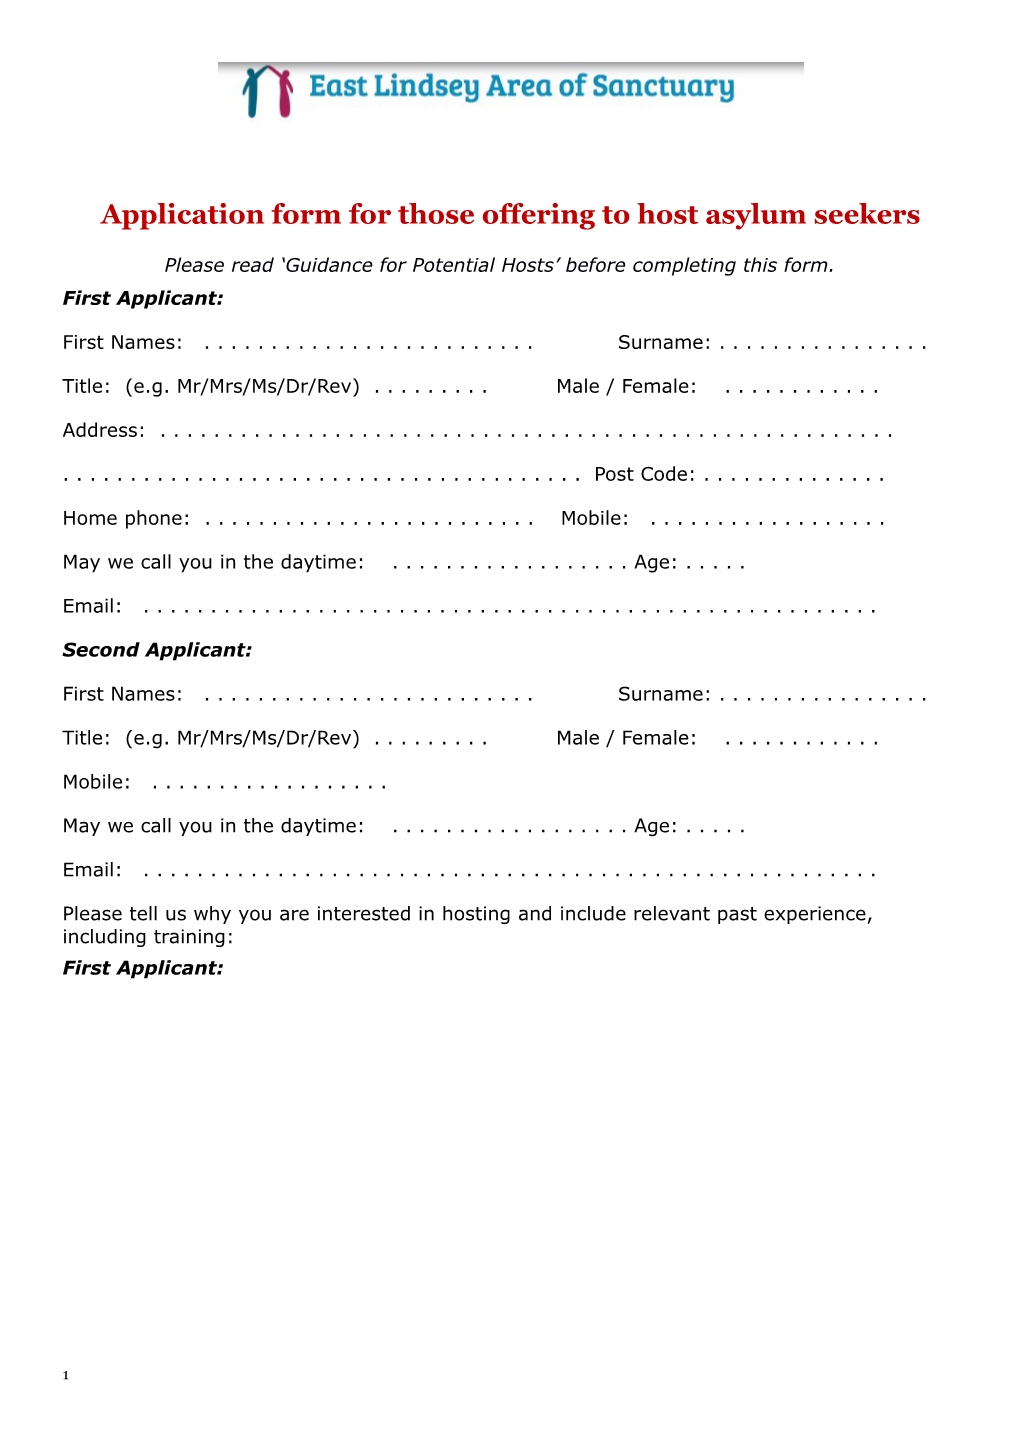 Application Form for Those Offering to Host Asylum Seekers